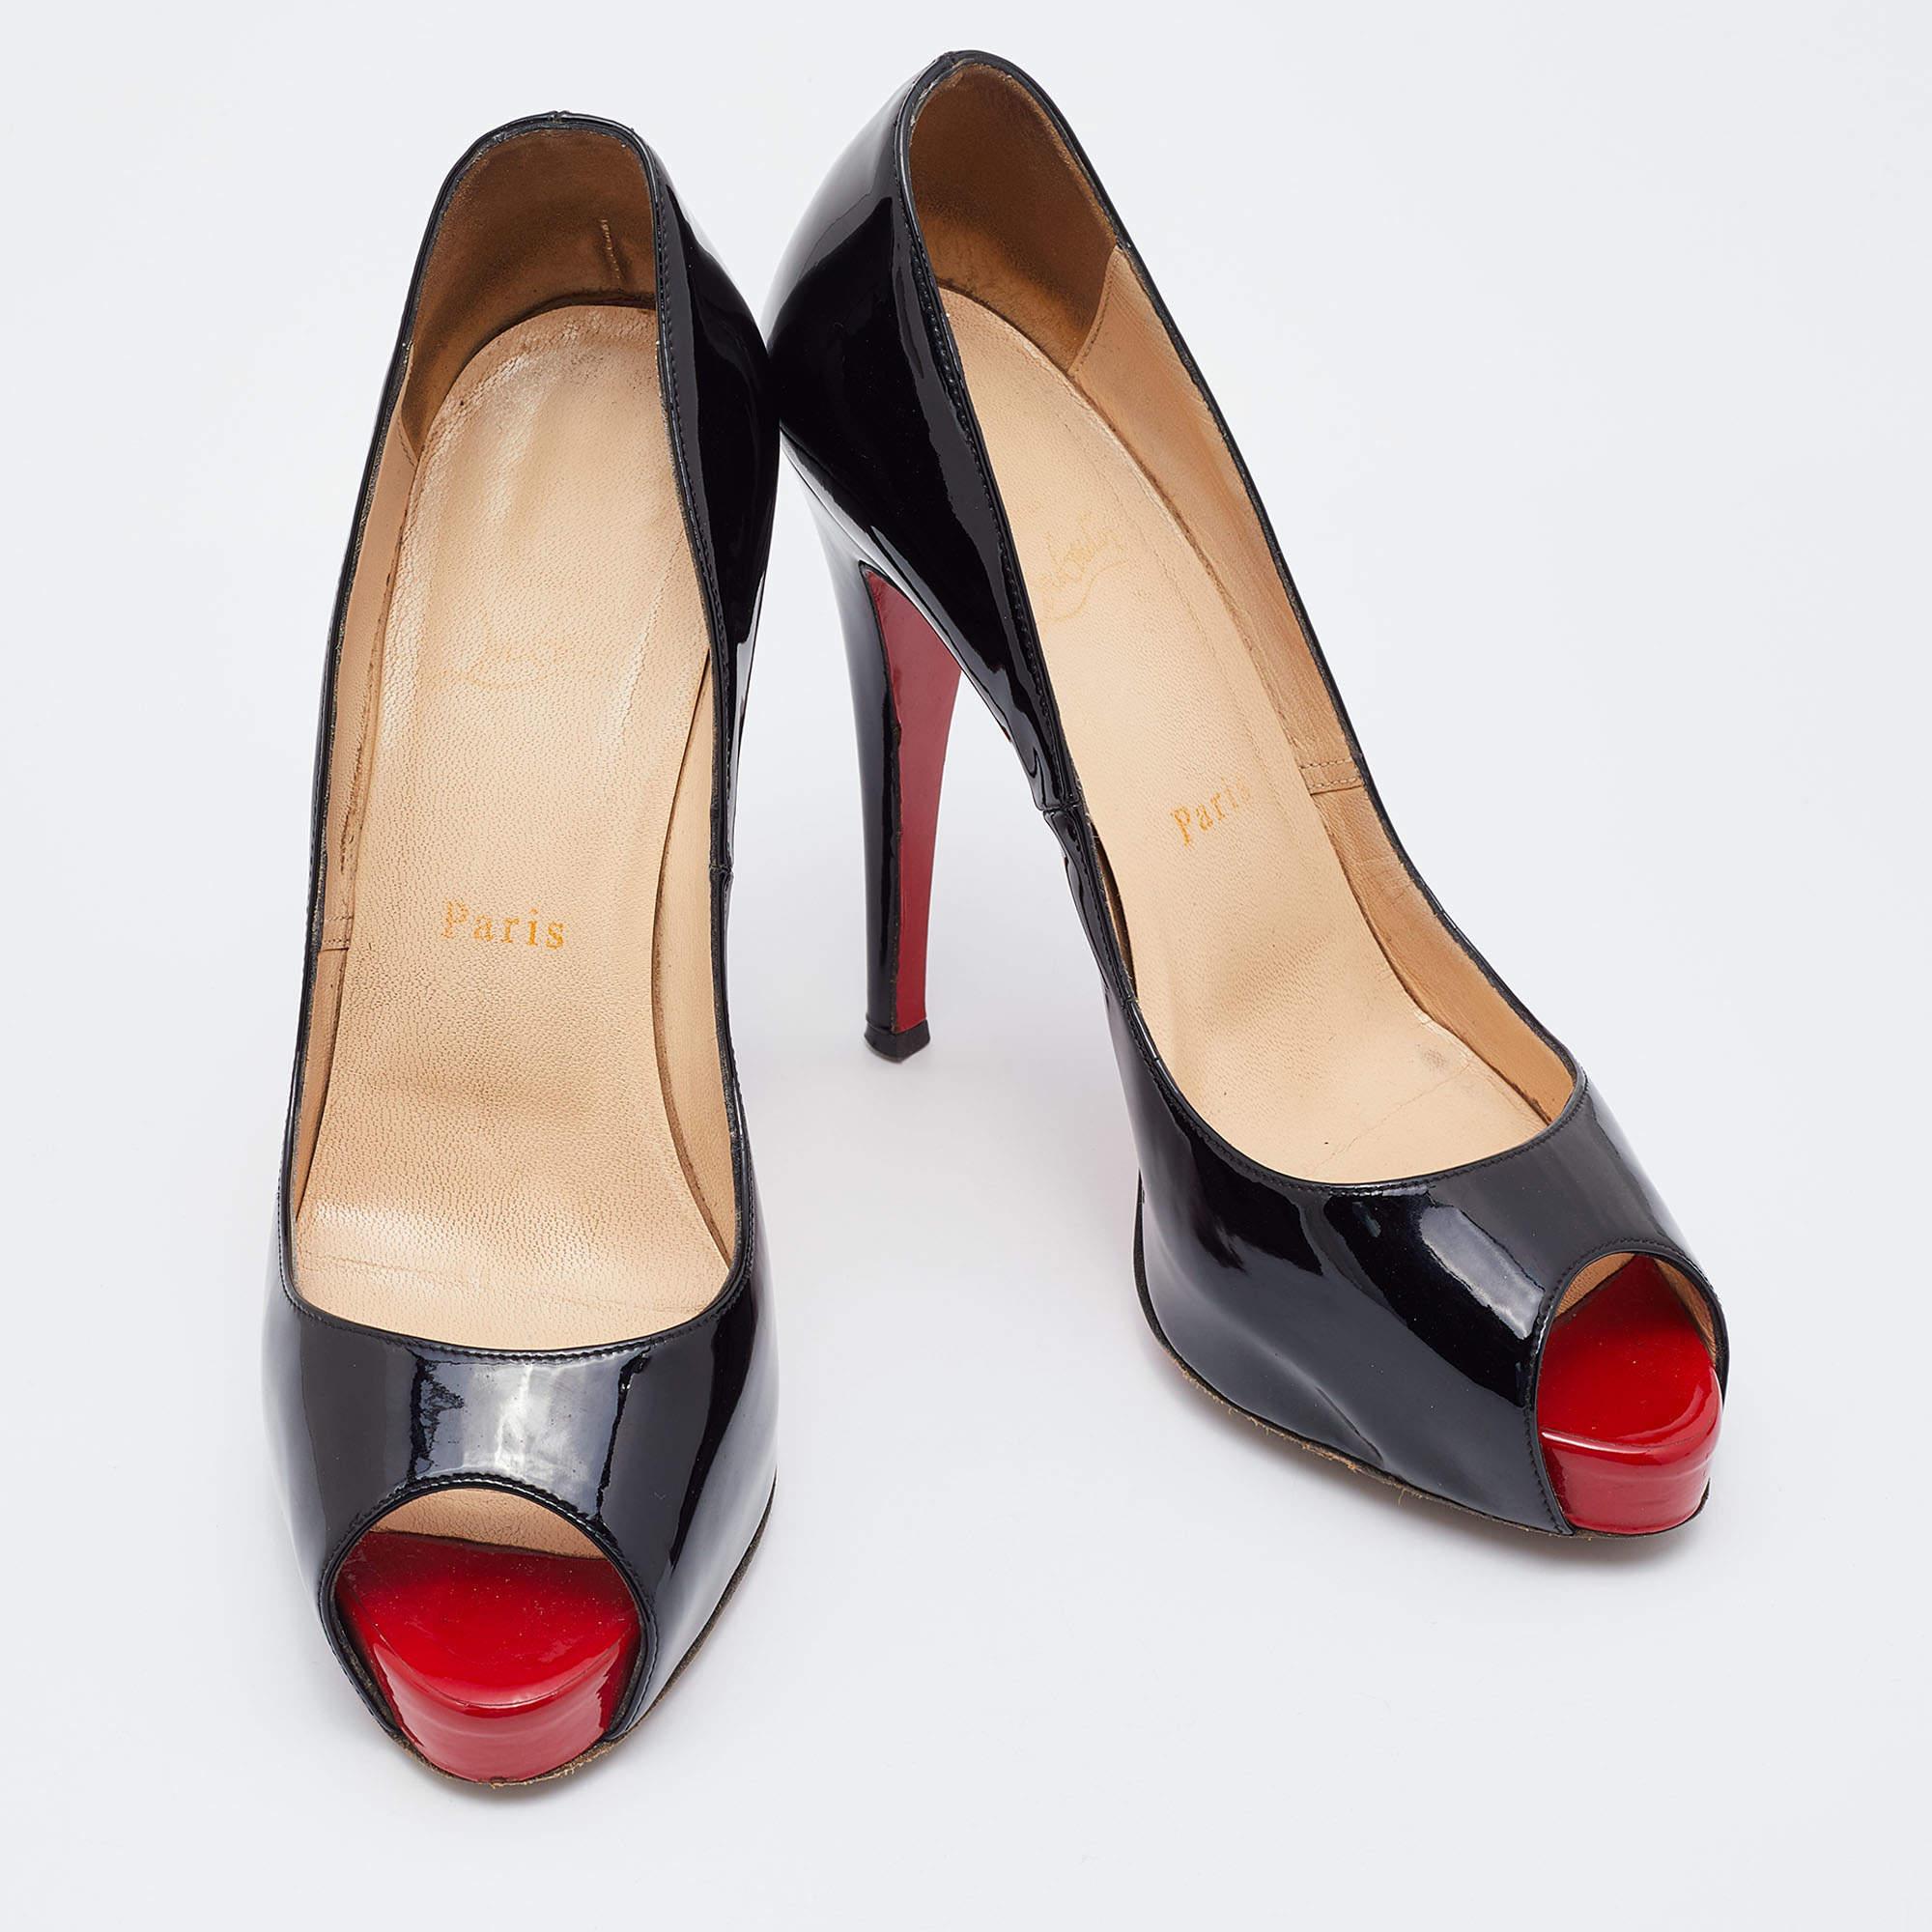 Christian Louboutin Black Patent Leather New Very Prive Pumps Size 39 1